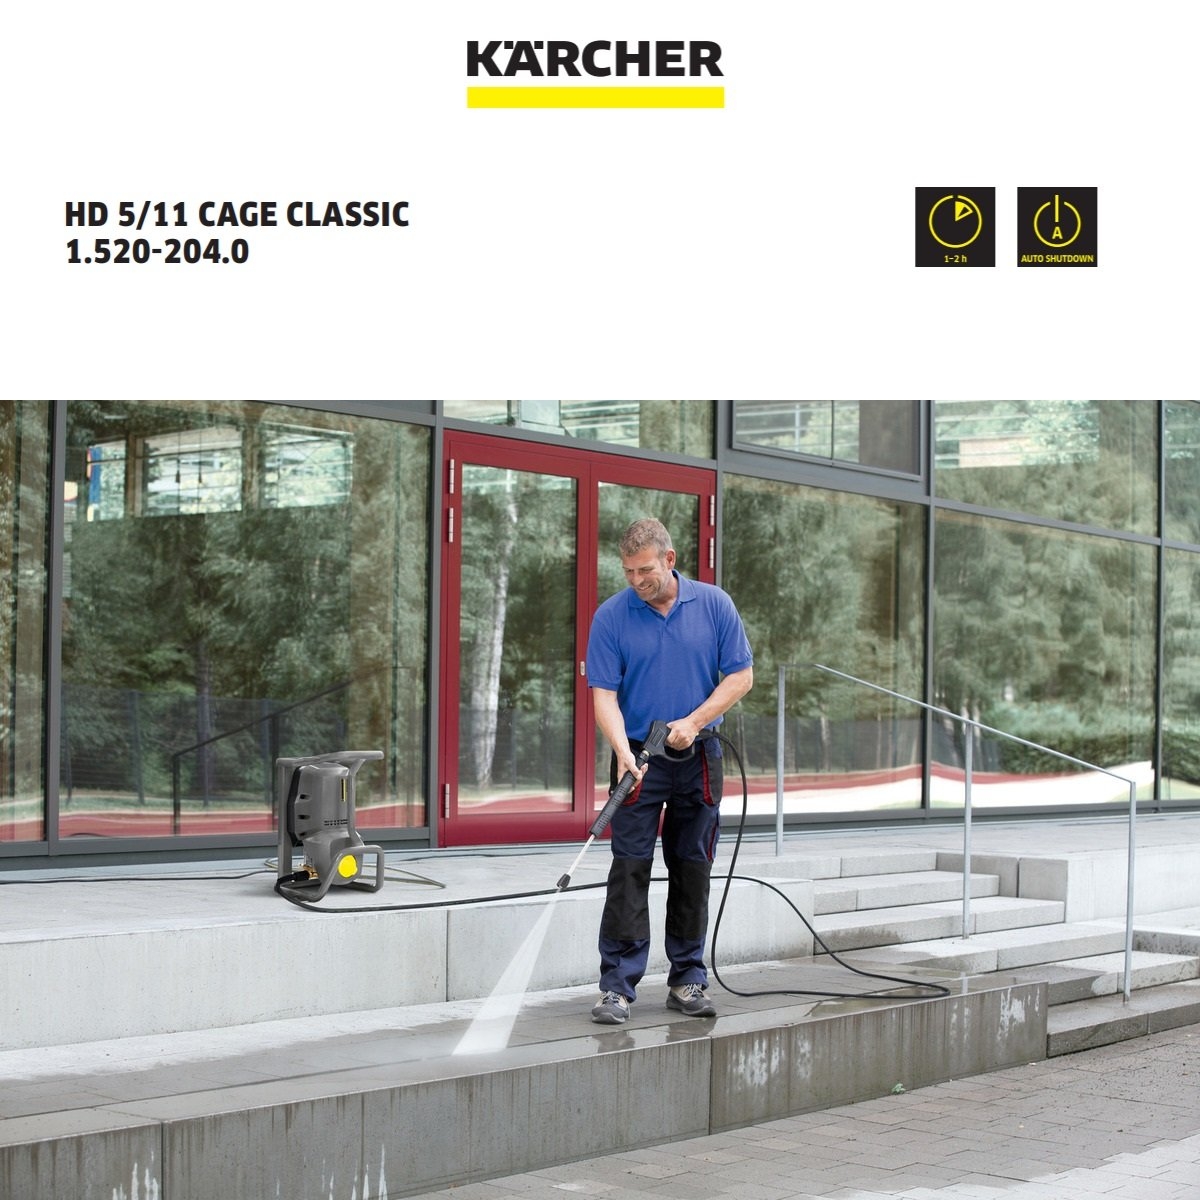 KARCHER HIGH PRESSURE WASHER HD 5/11 Cage Classic High-Pressure Cleaner  Karcher Professional Professional Cleaning